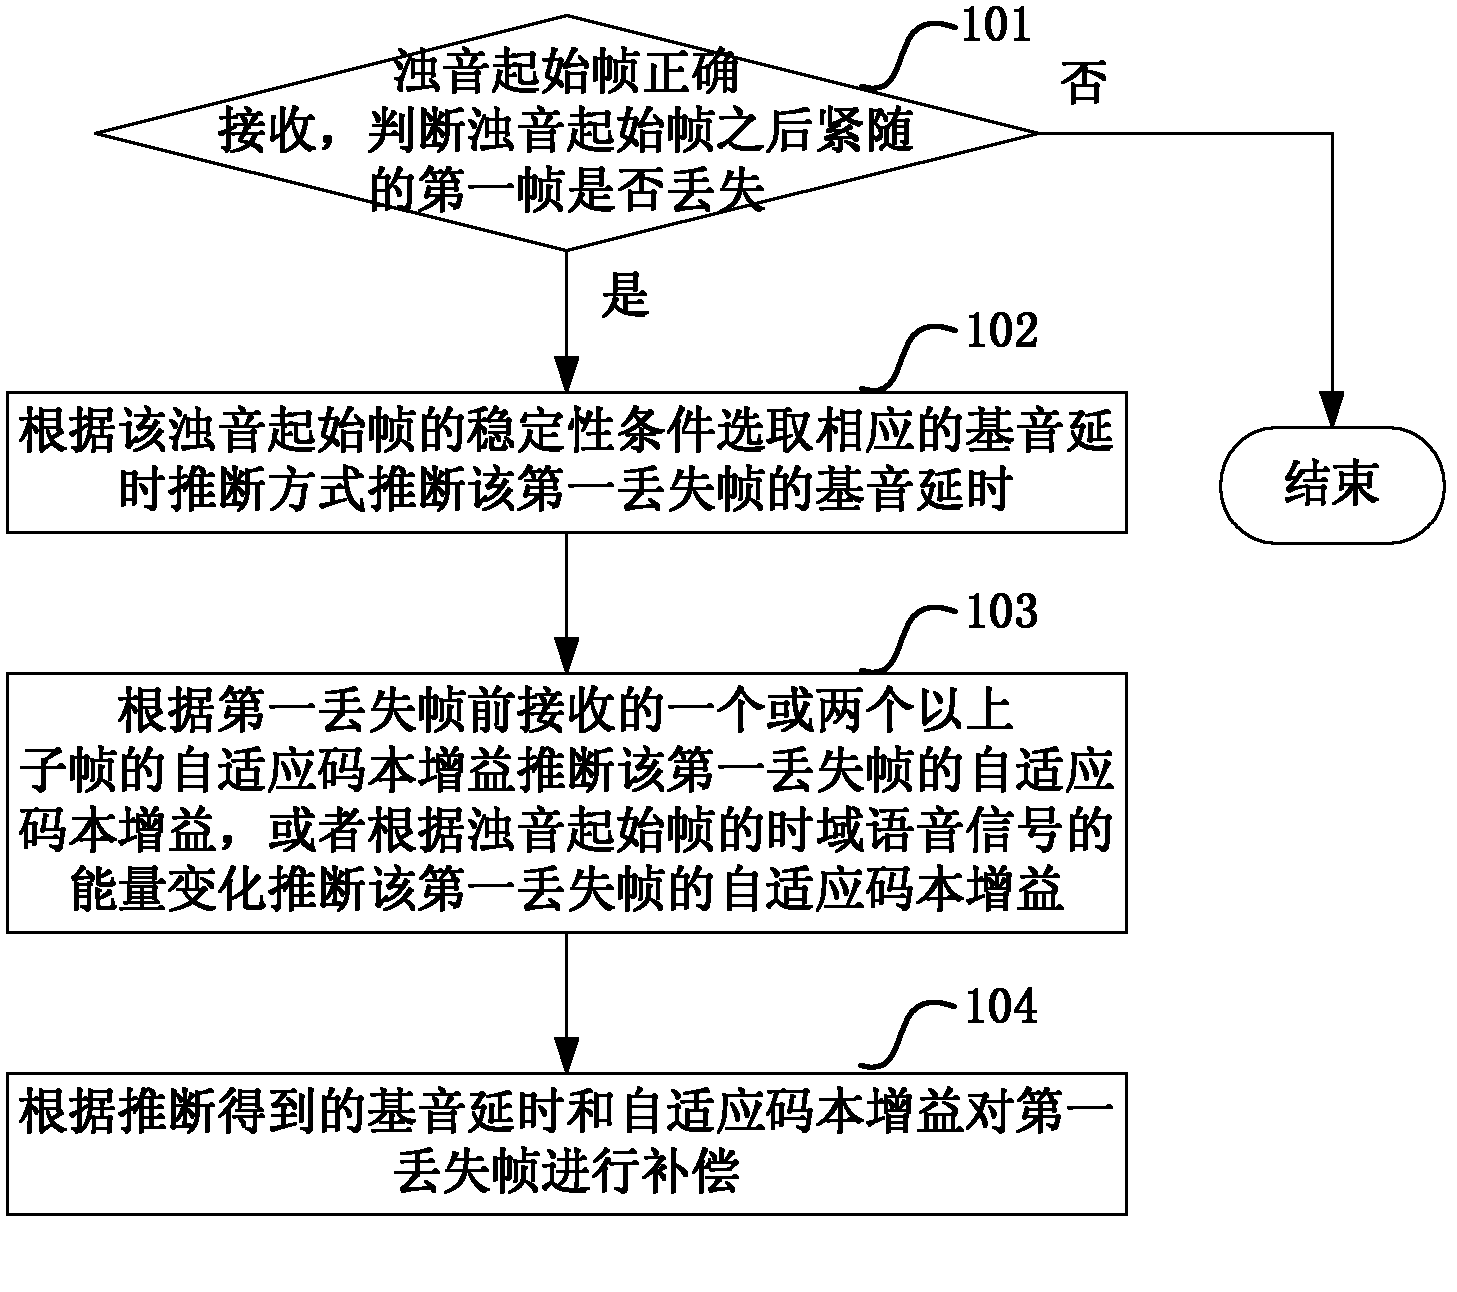 Method and device for compensating drop frame after start frame of voiced sound